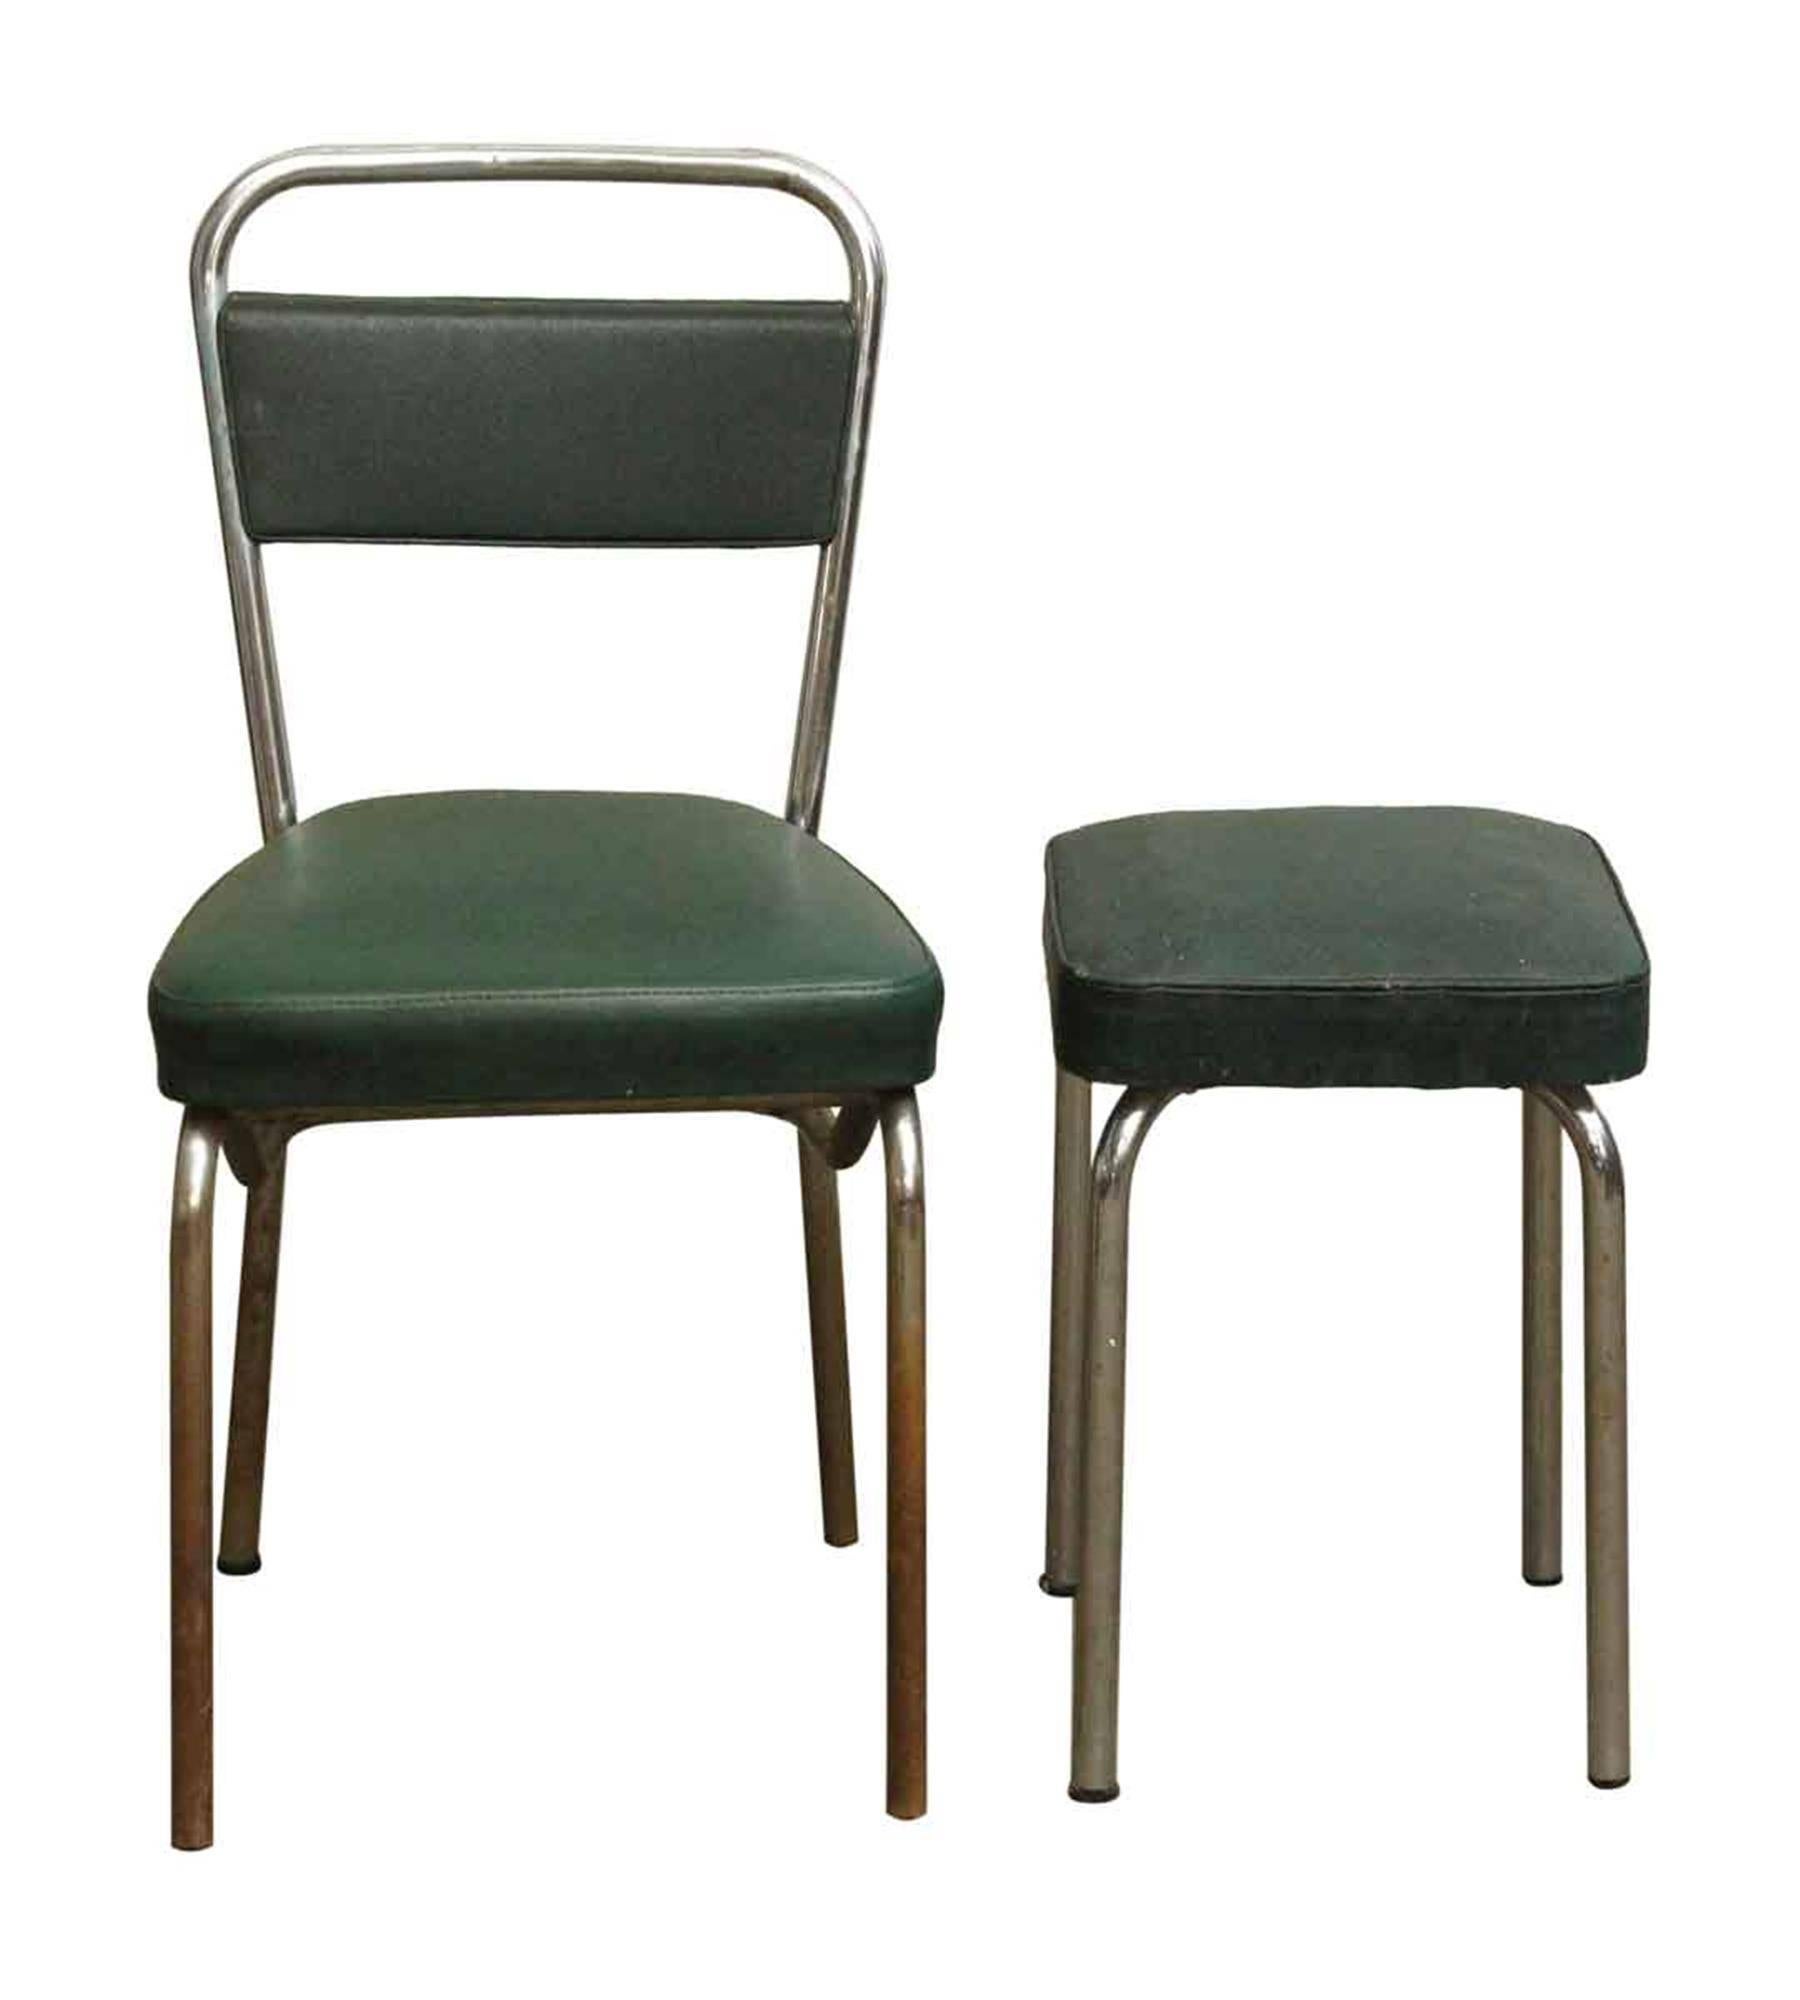 1970s Strafor dark green chairs with matching green stools and a chrome base. Shows some wear. Priced as a four piece set. Please note, this item is located in our Los Angeles location.